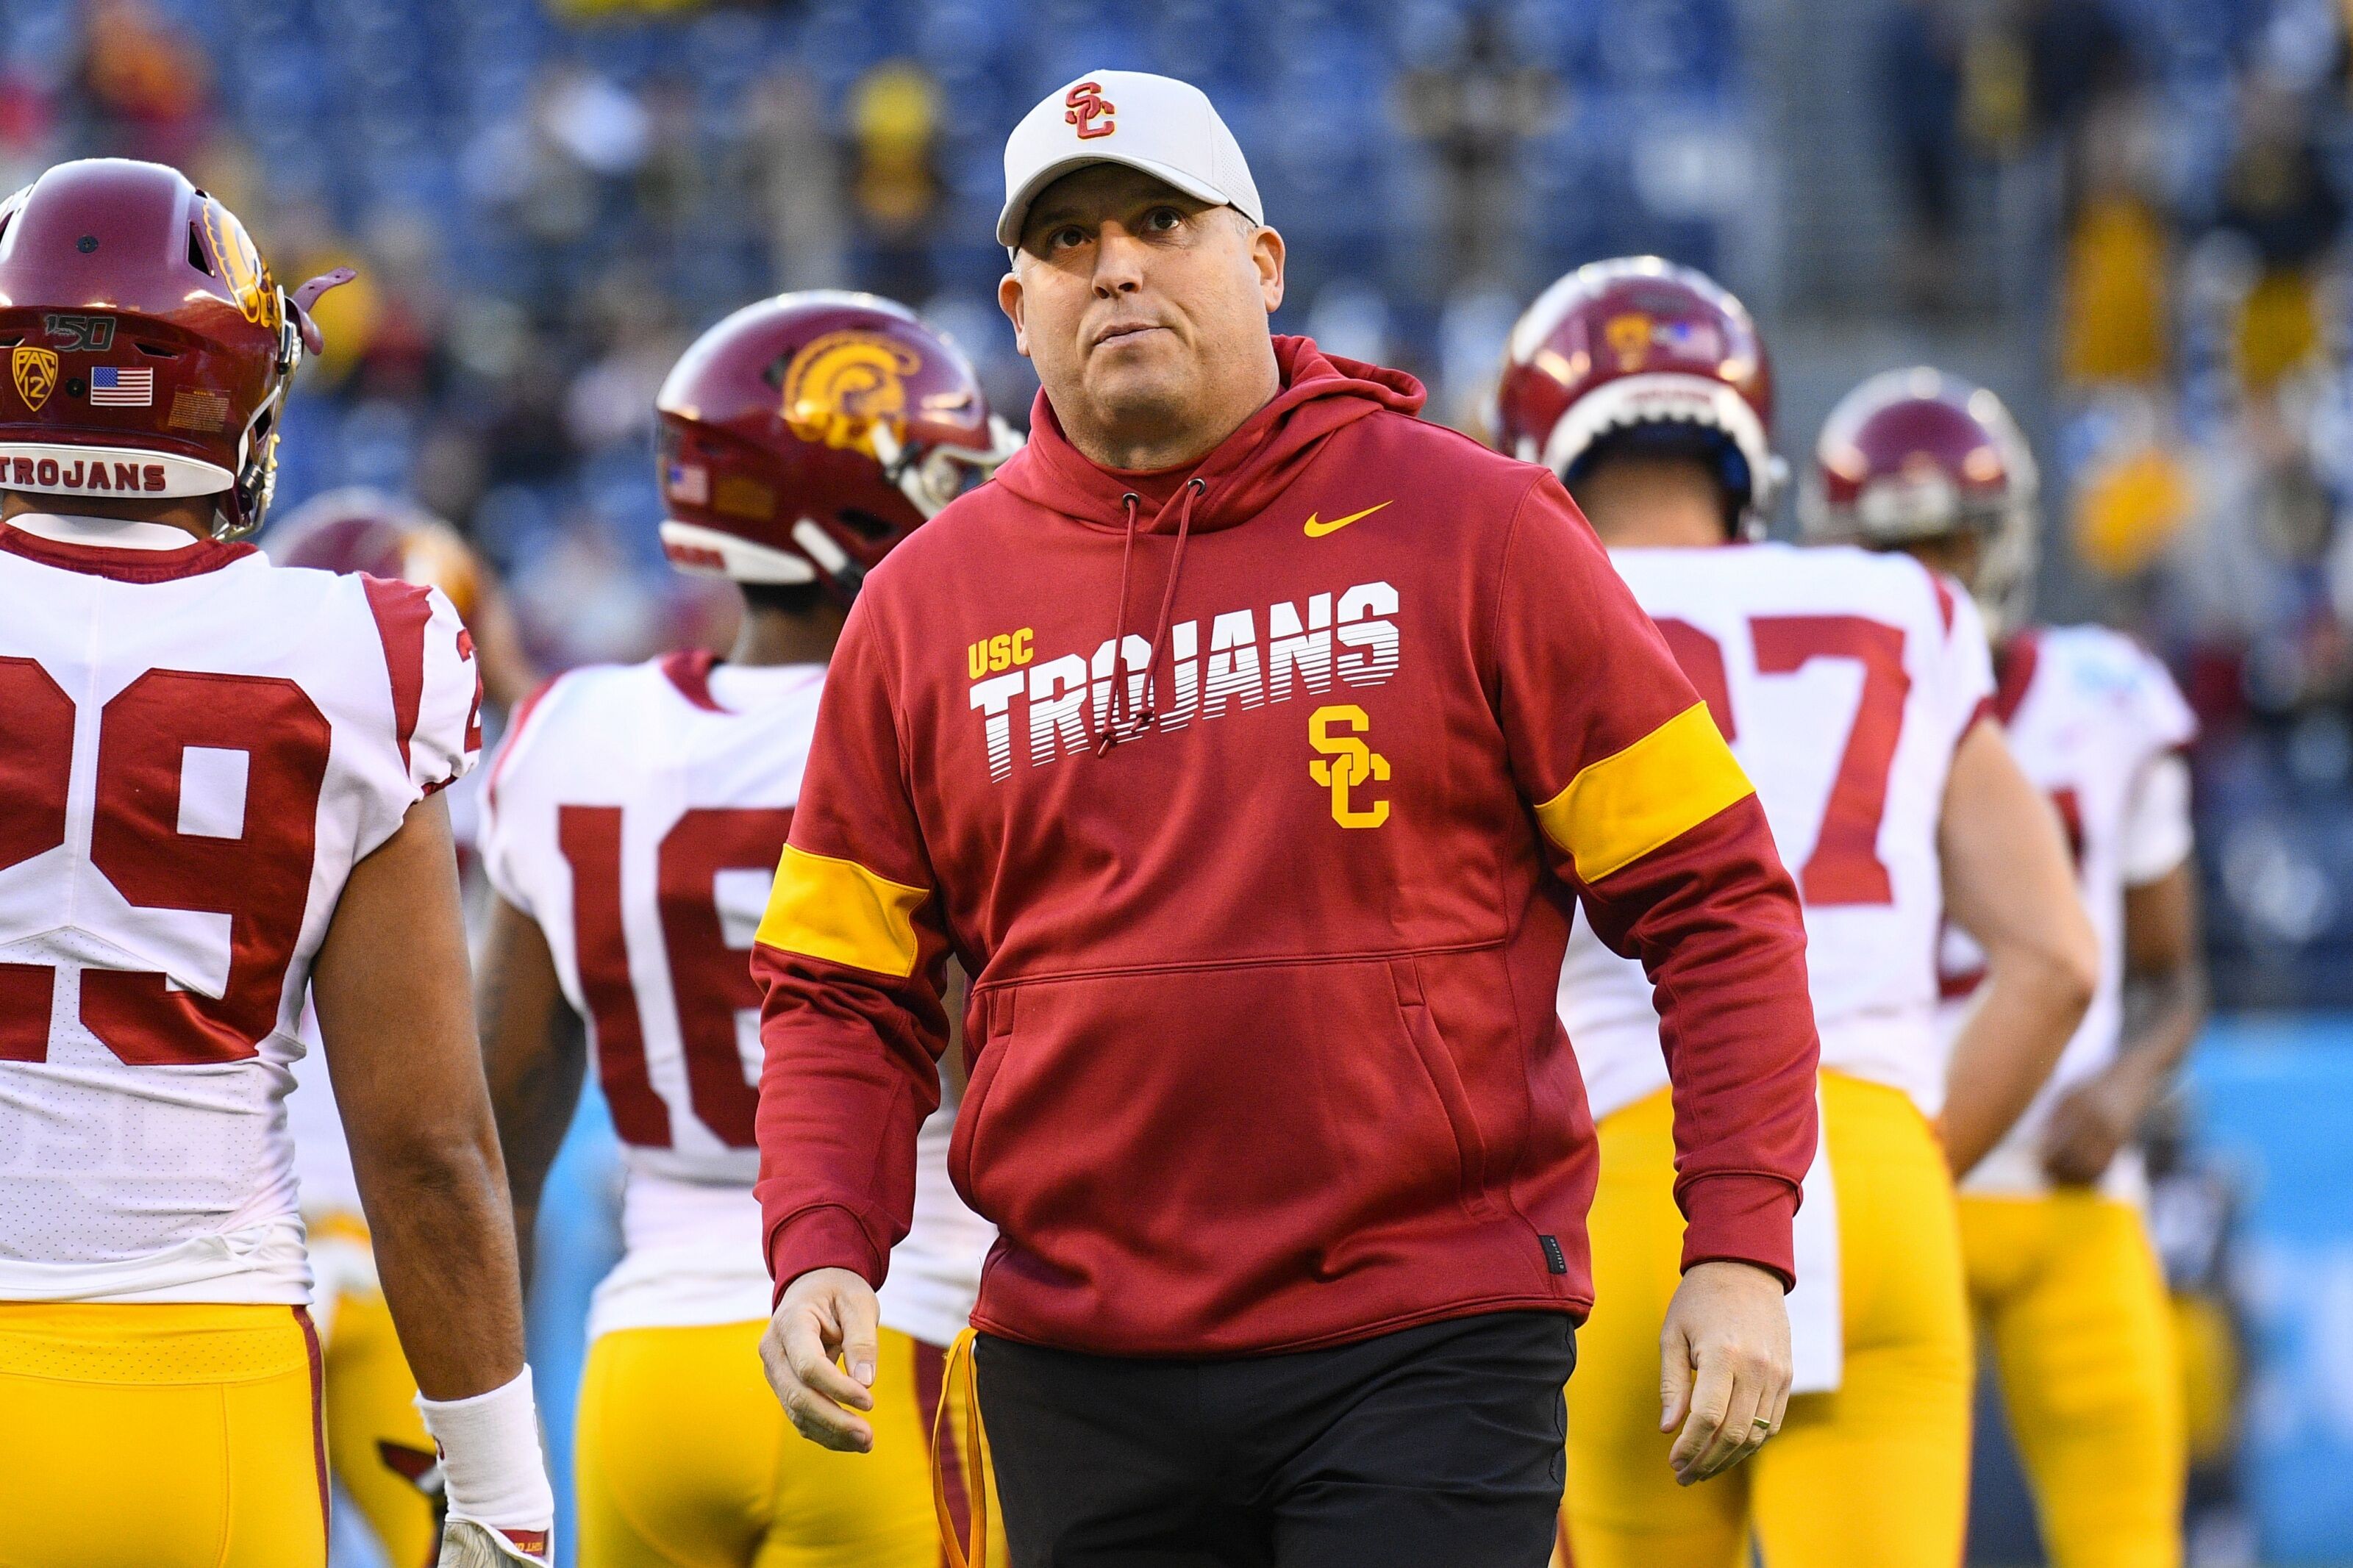 USC recruiting class of 2020 ends with a whimper on Signing Day